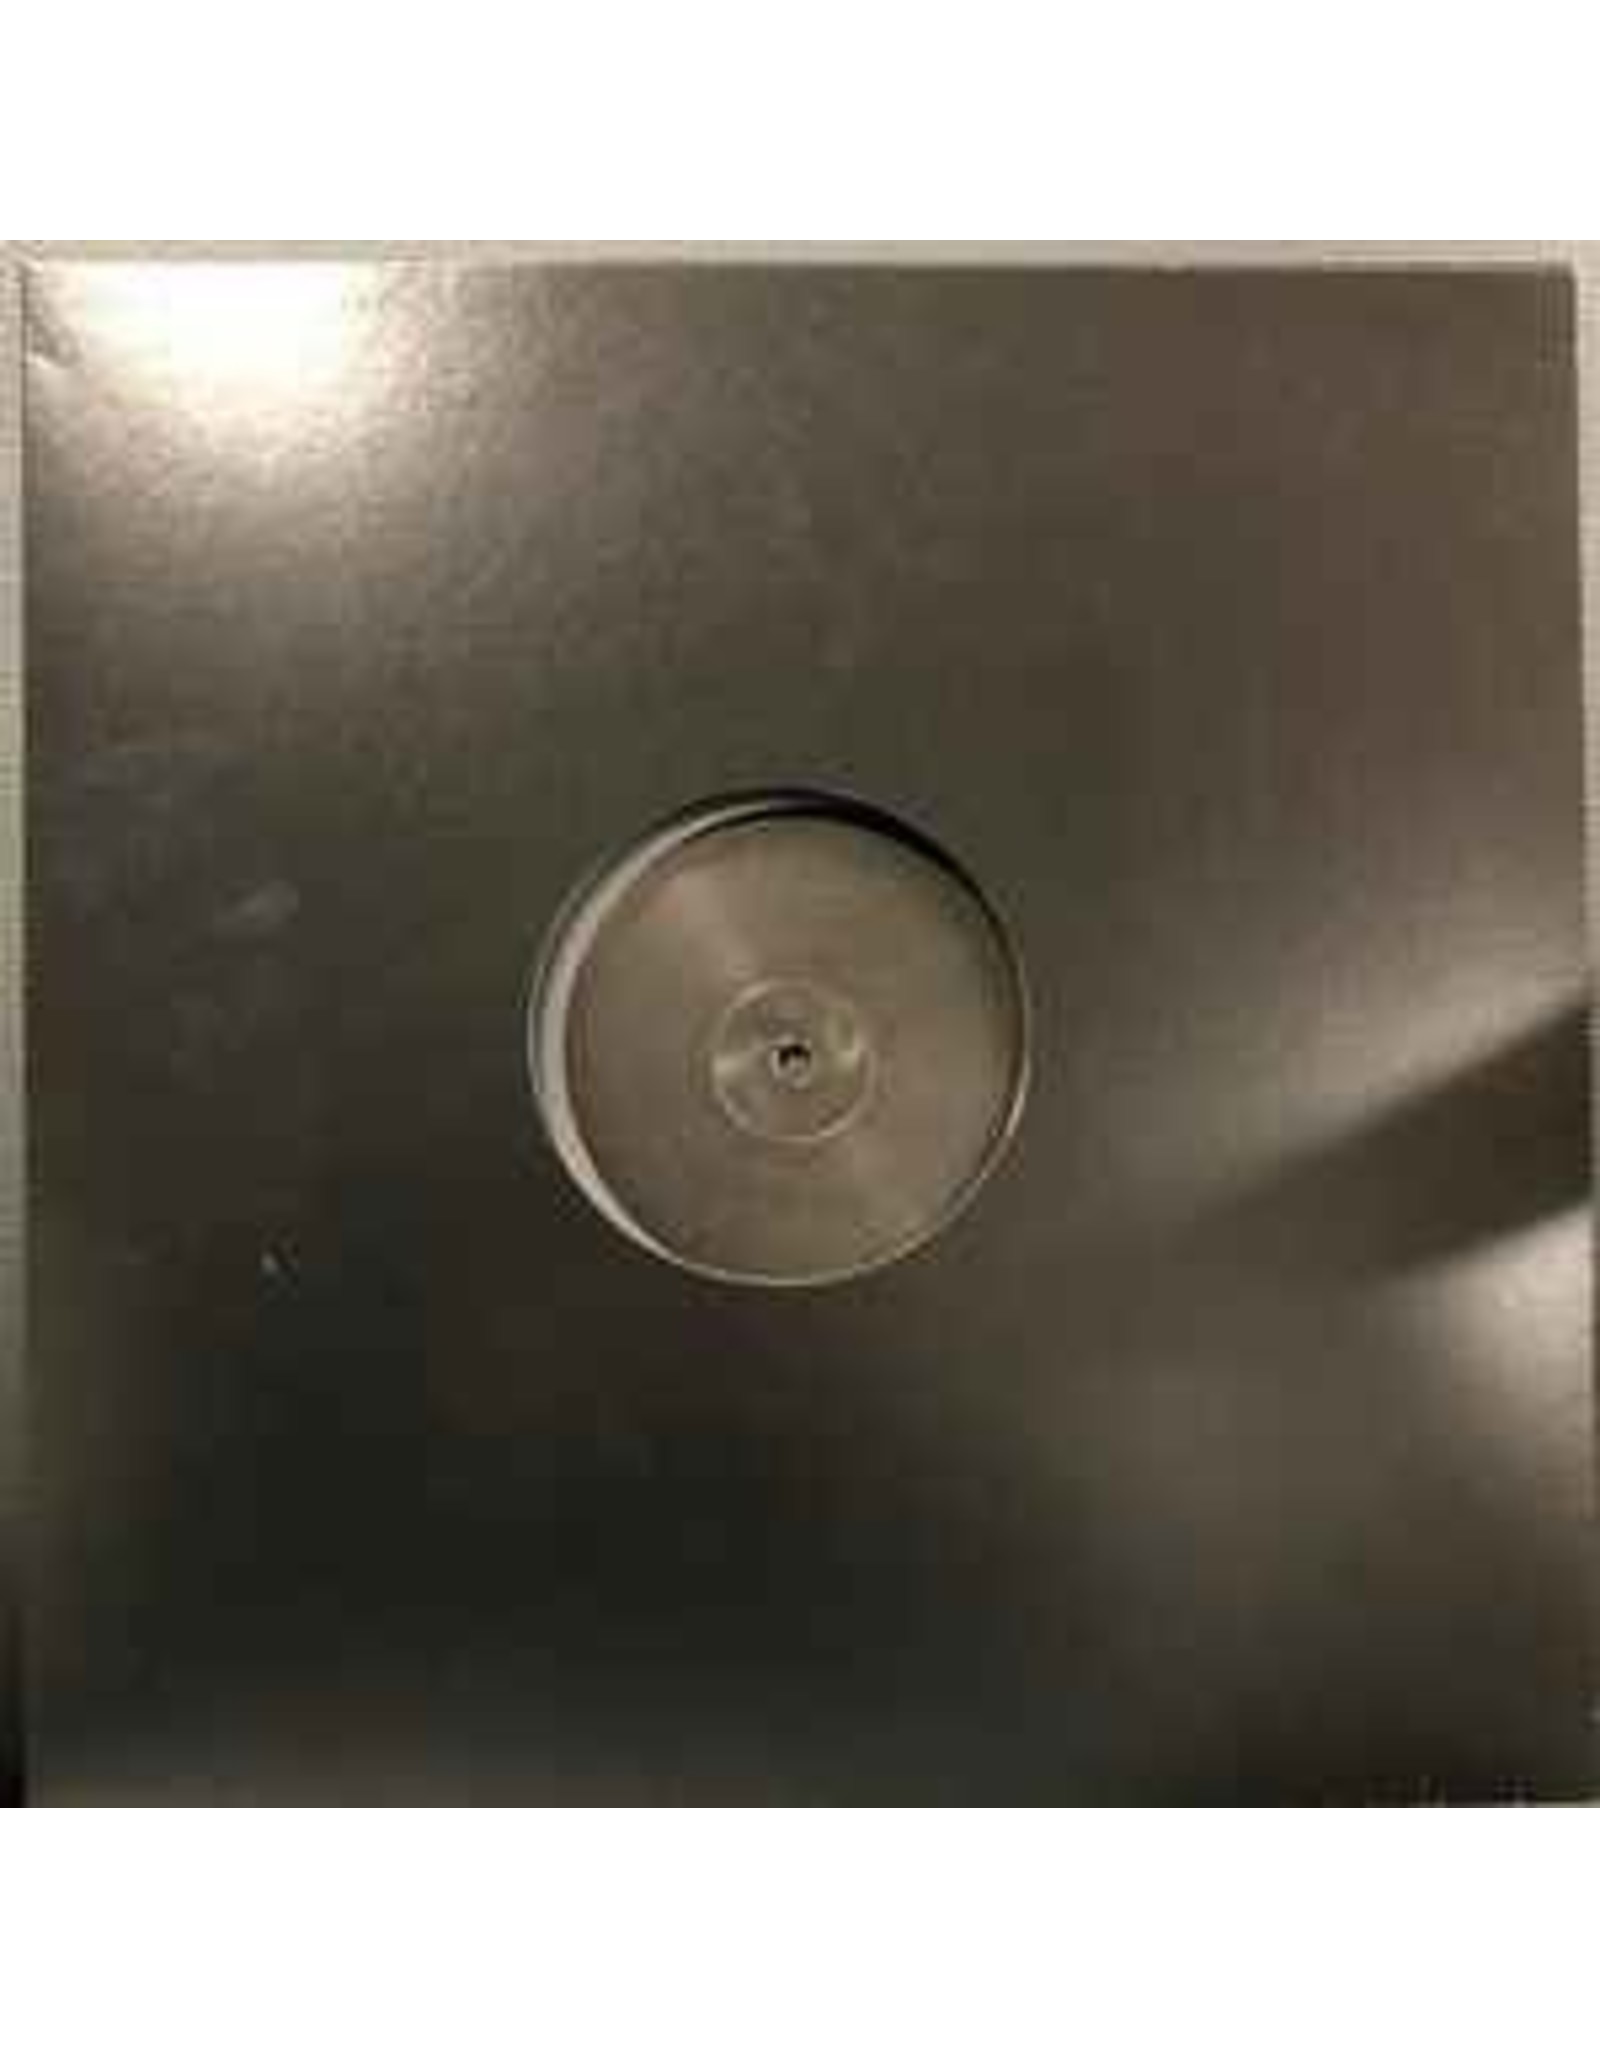 Burial & Four Tet & Yorke, Thom (Radiohead) - Her Revolution / His Rope  (very limited) 12"